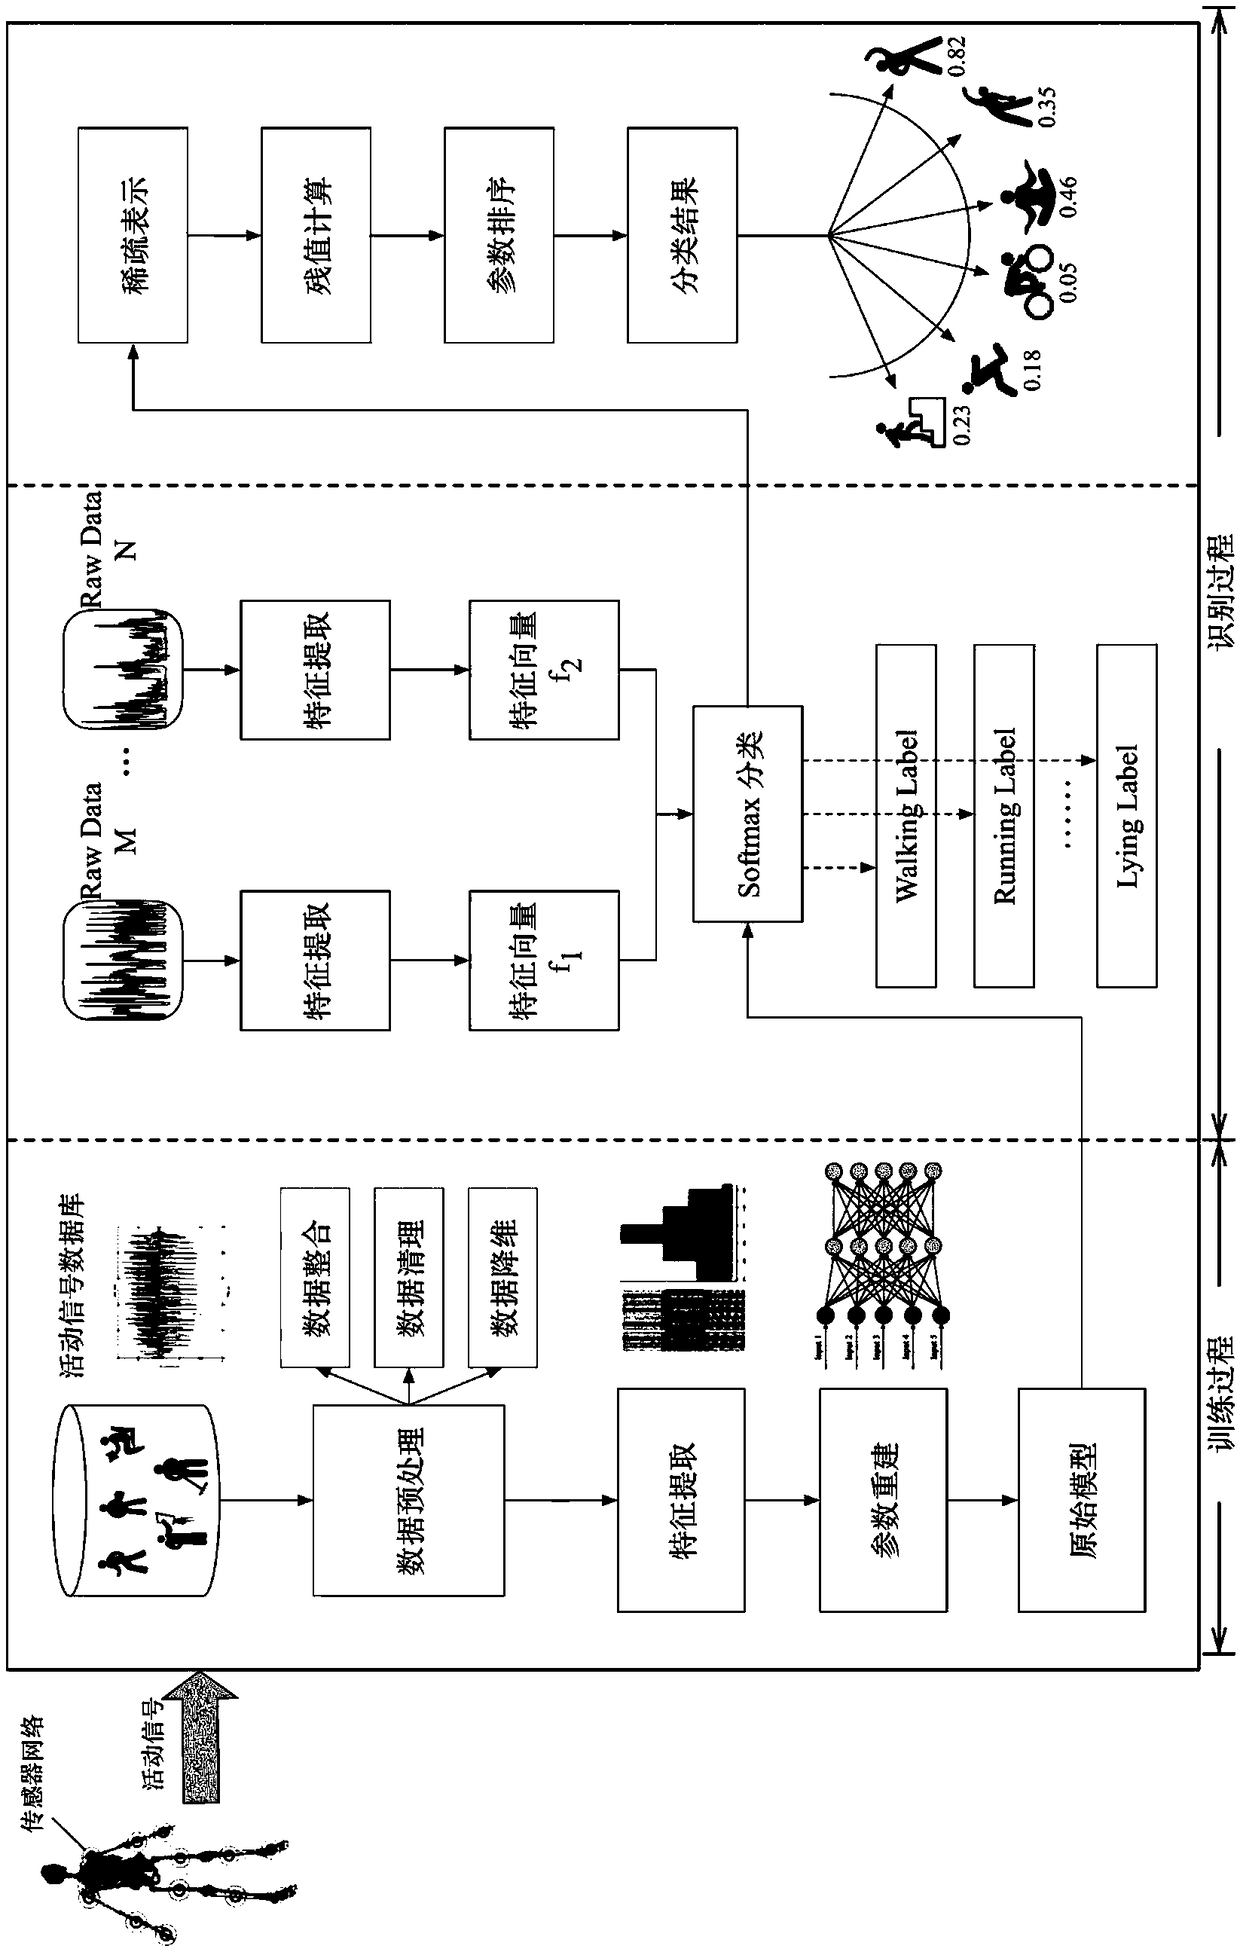 A human activity recognition method based on sparse representation and Softmax classification